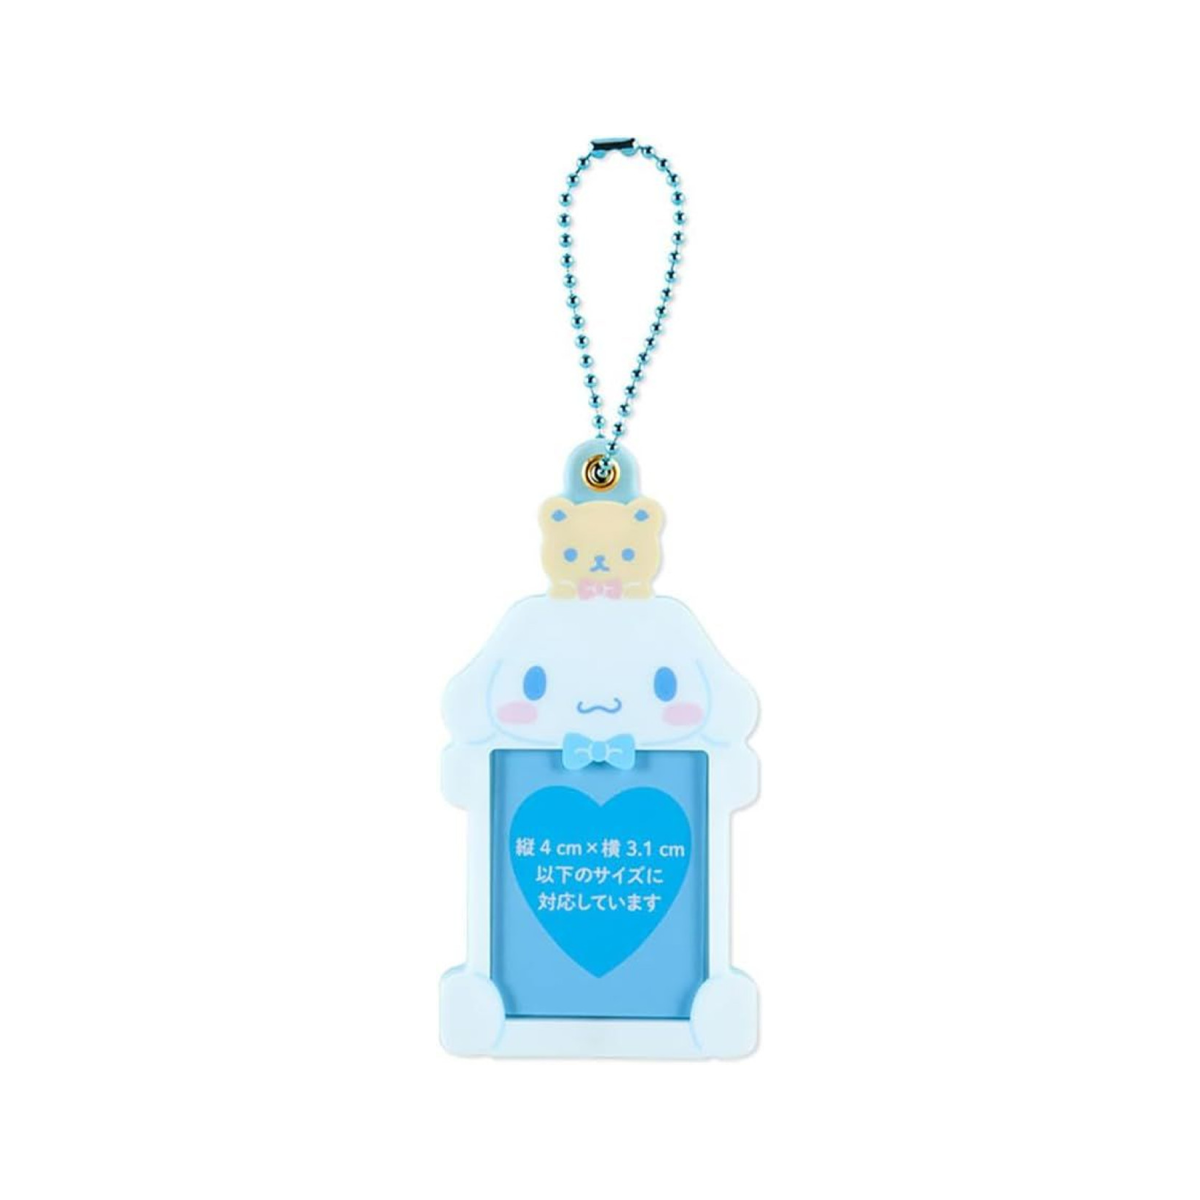 Hanging Photo Holder - Sanrio Character (Limited Japan Edition)